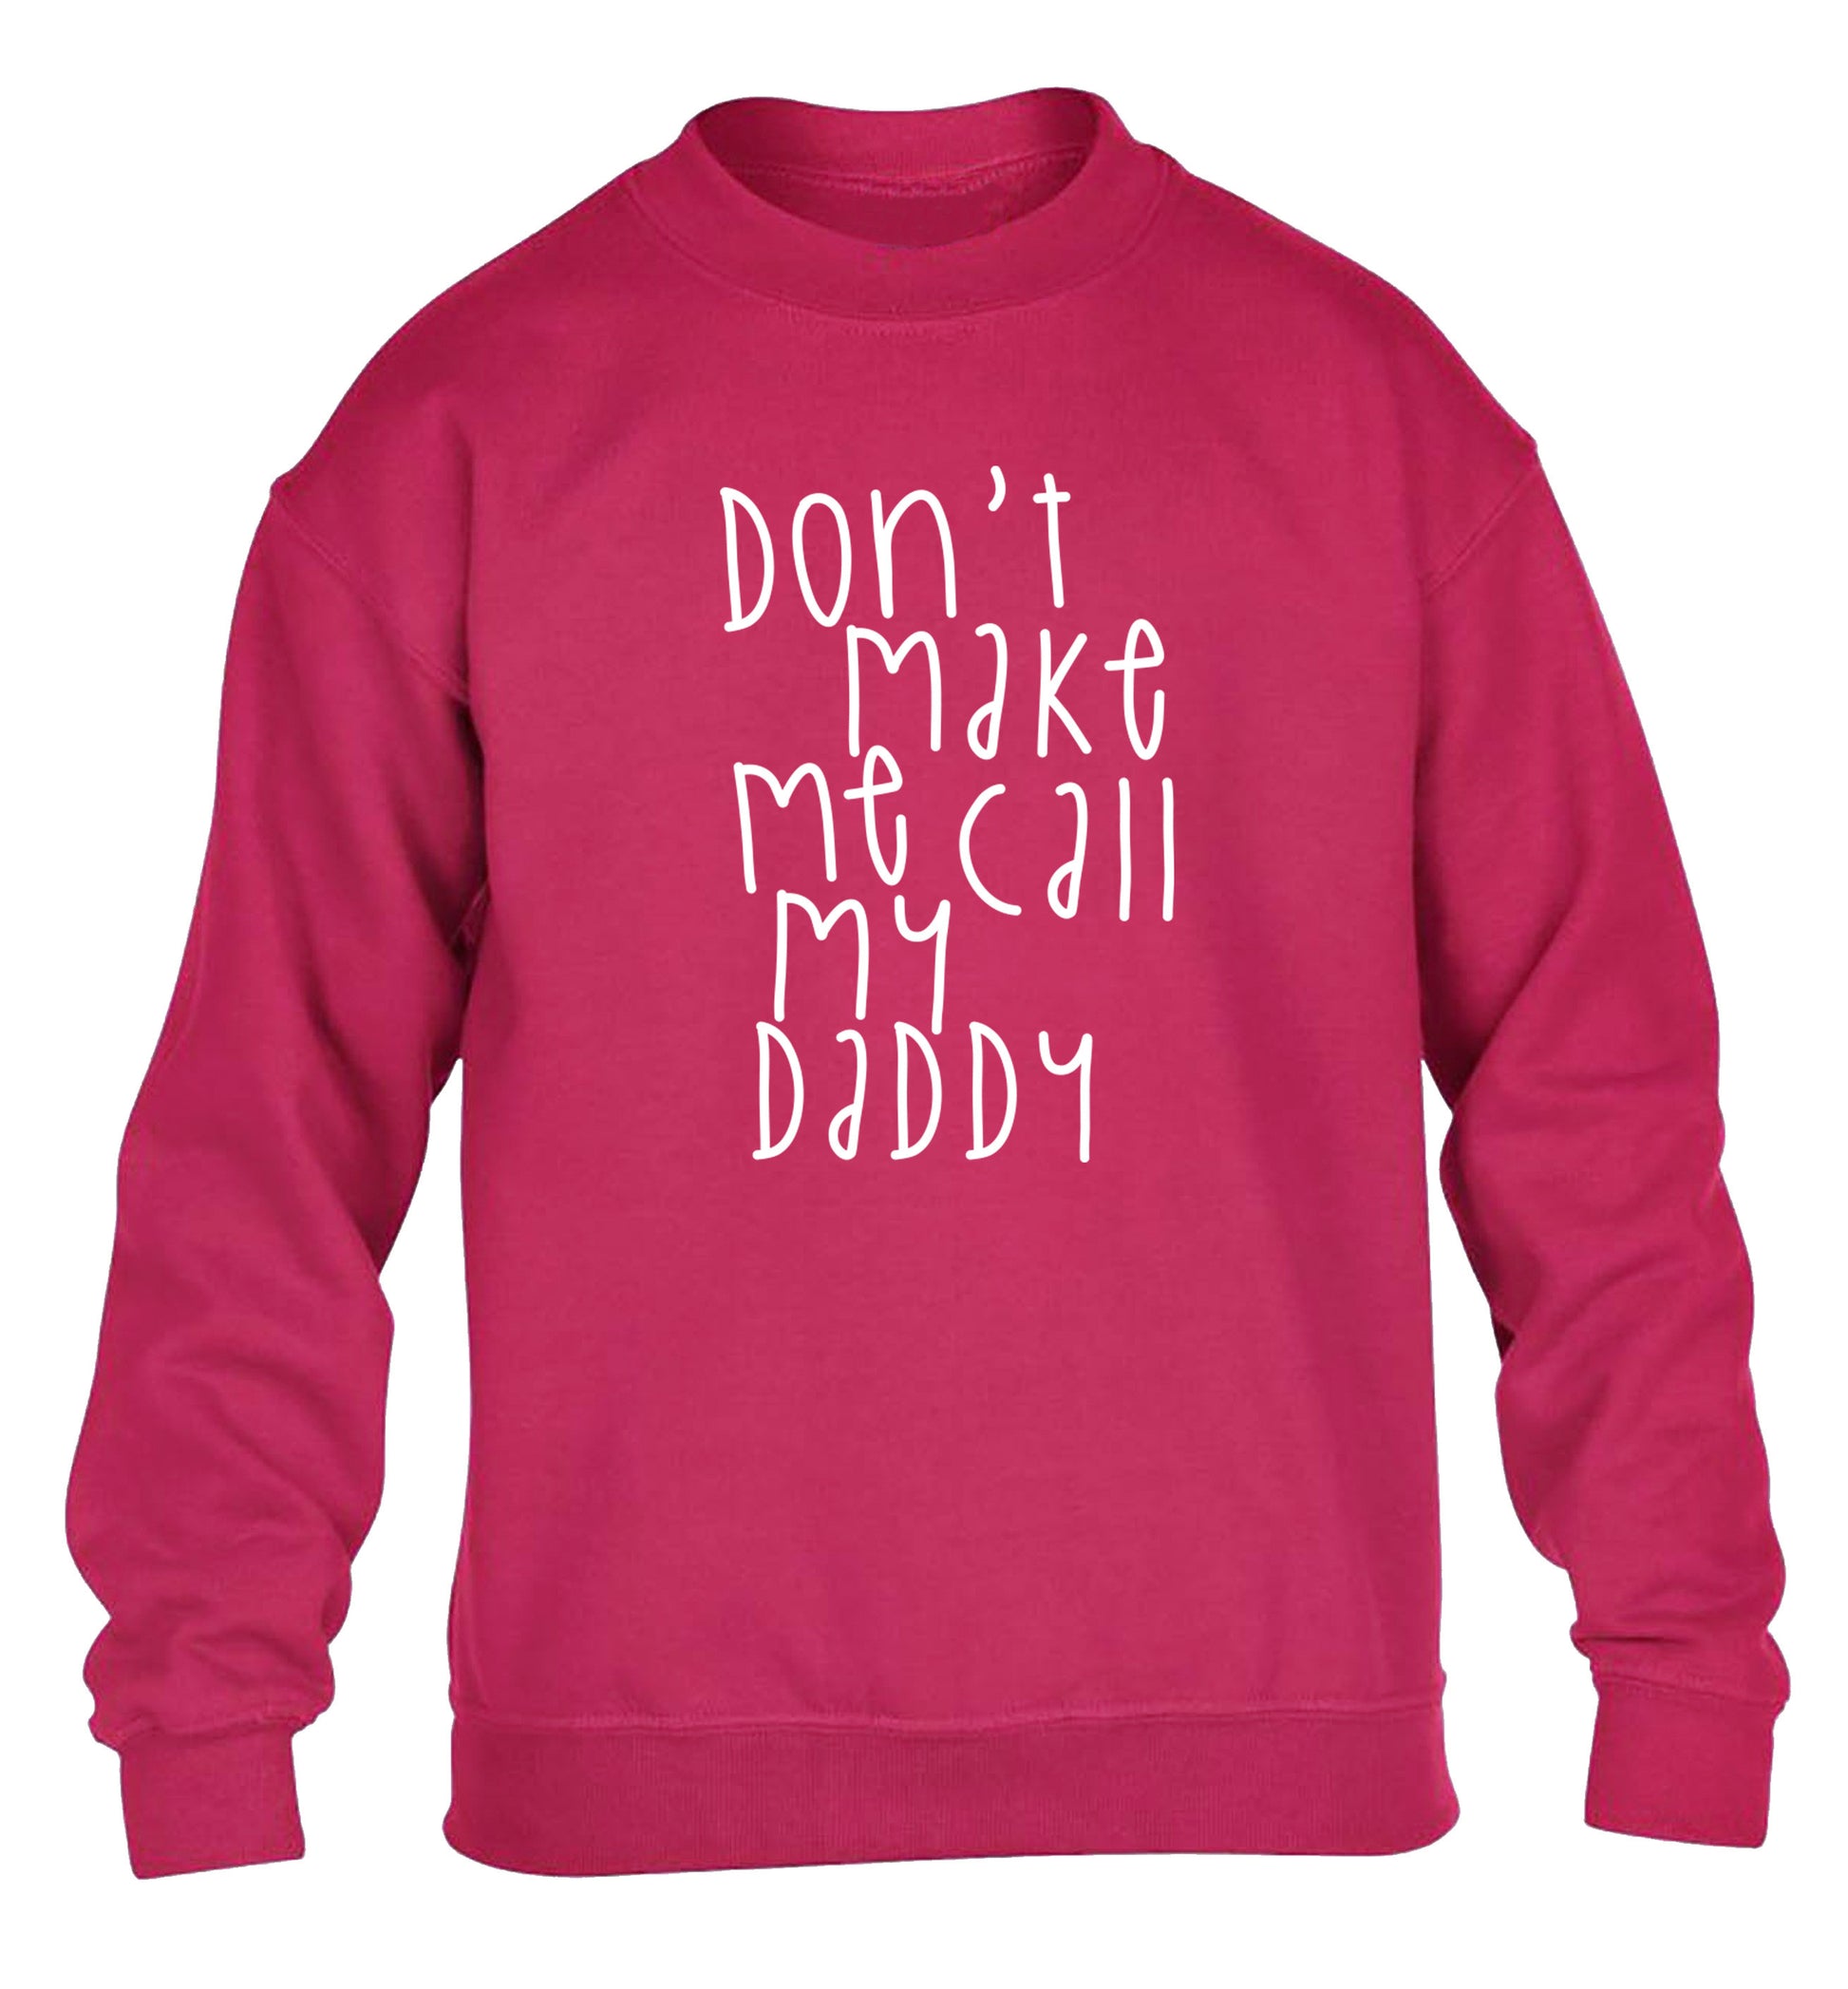 Don't make me call my daddy children's pink sweater 12-14 Years